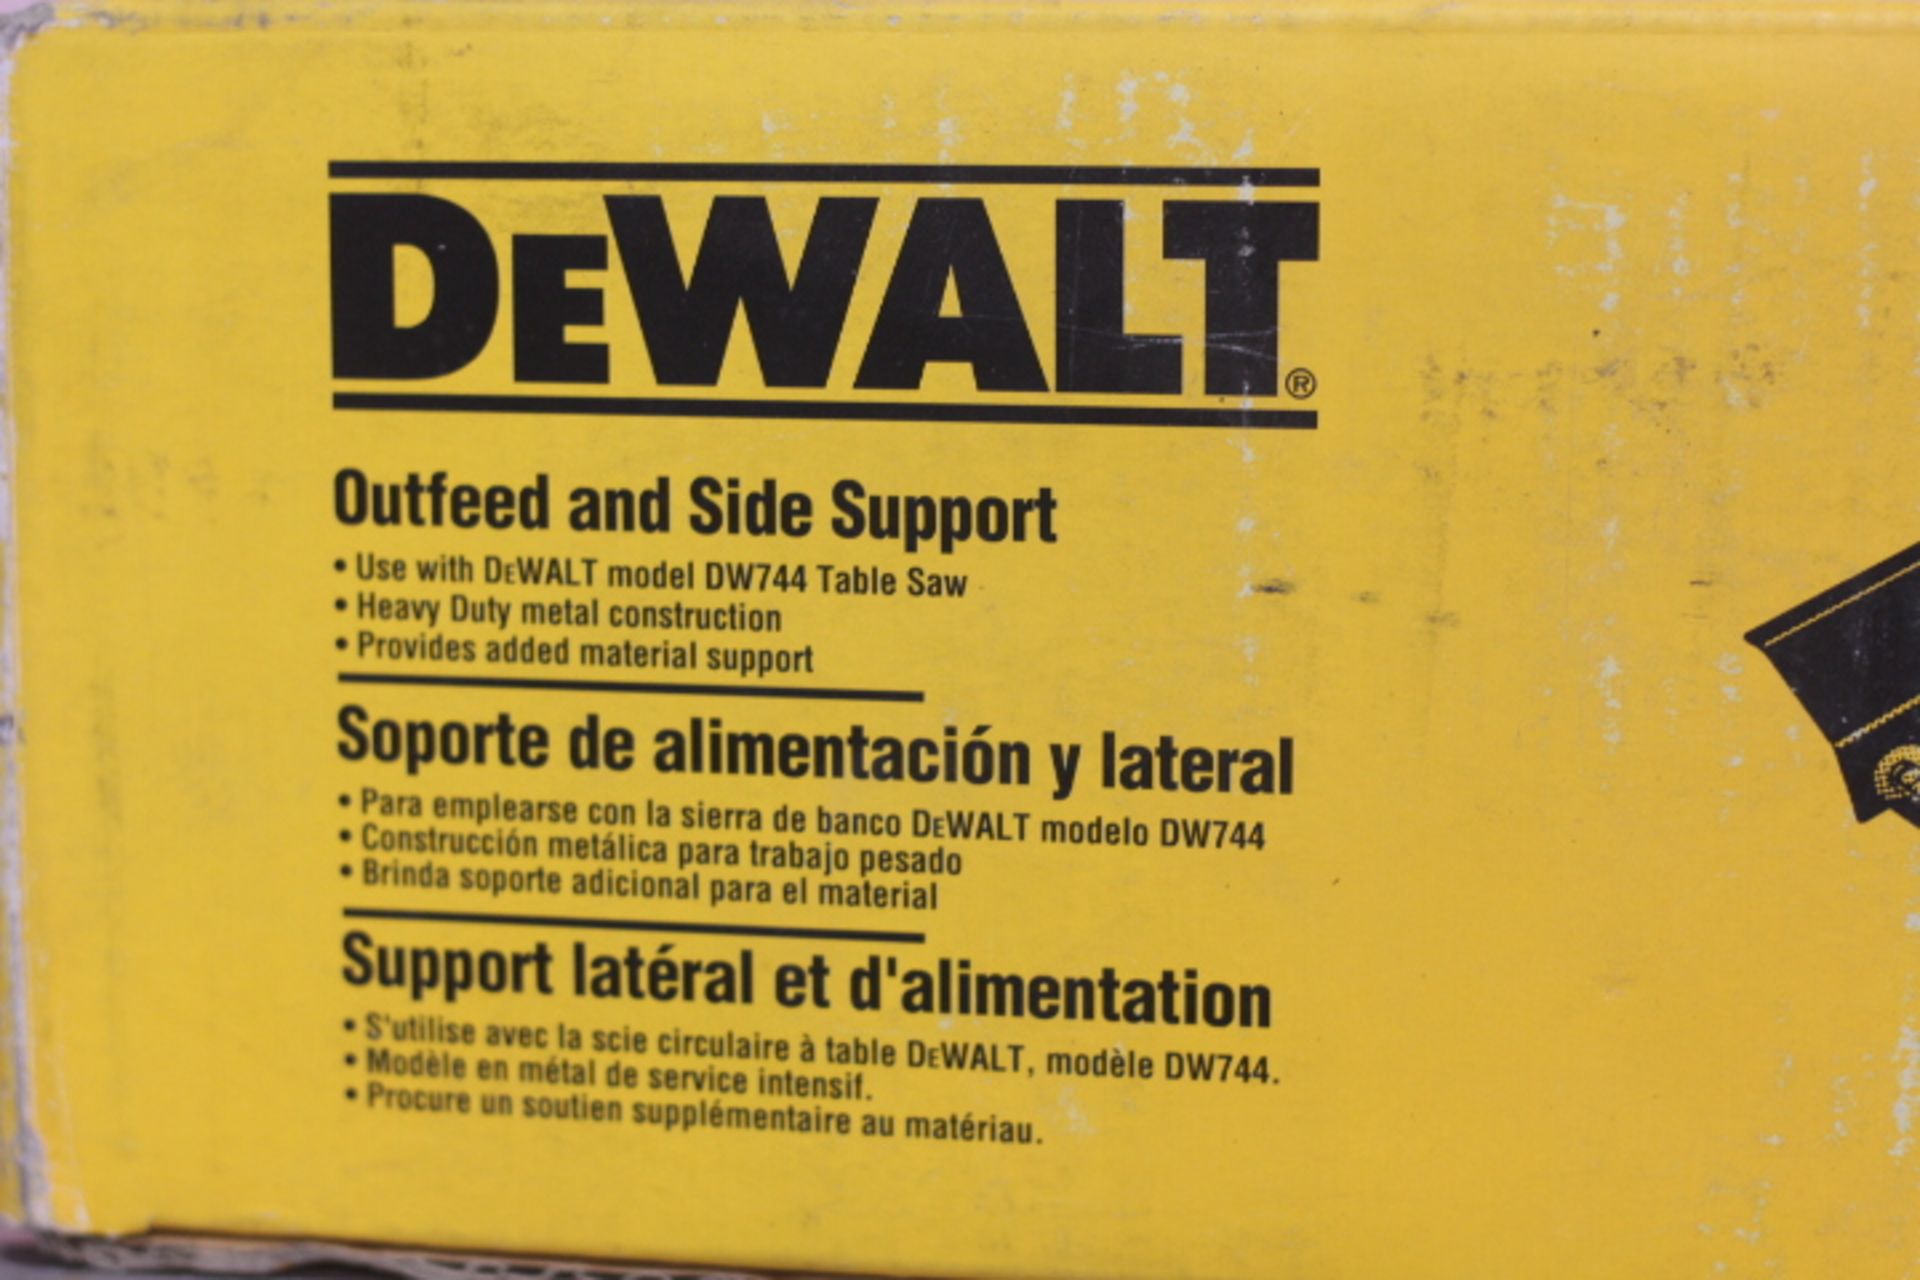 New Dewalt Outfeed and Sidesupport for Dewalt Table Saws - Image 3 of 3